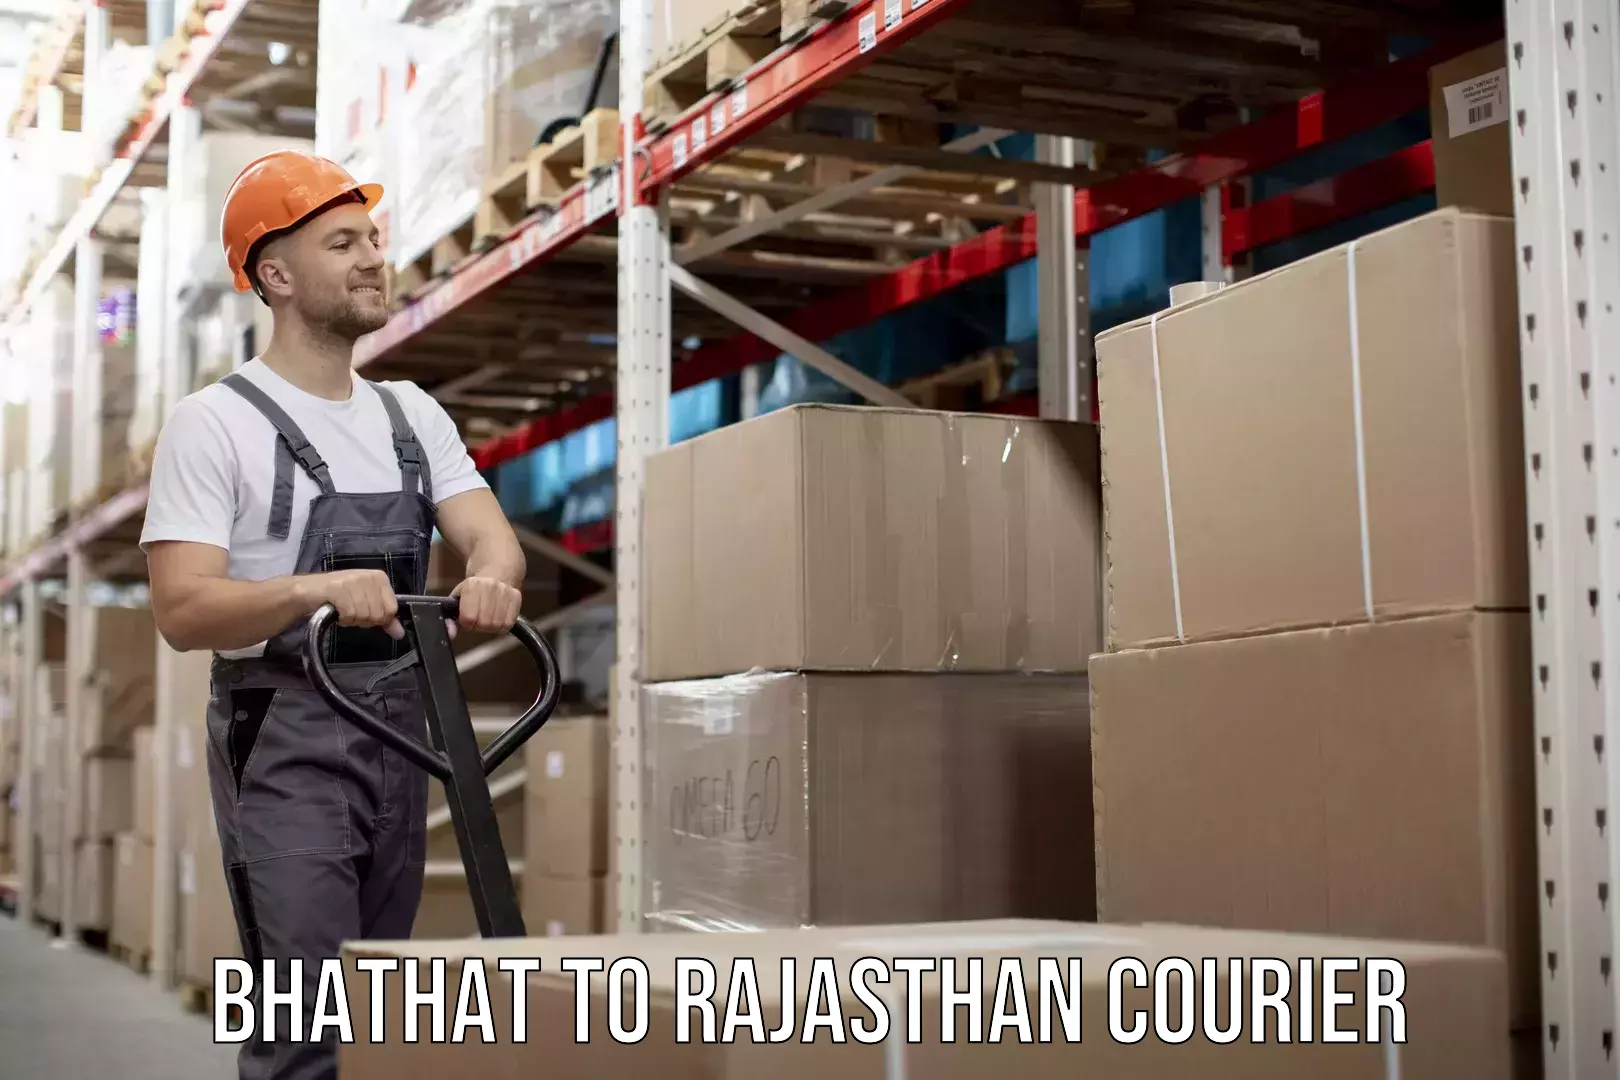 Professional courier handling Bhathat to Rajasthan